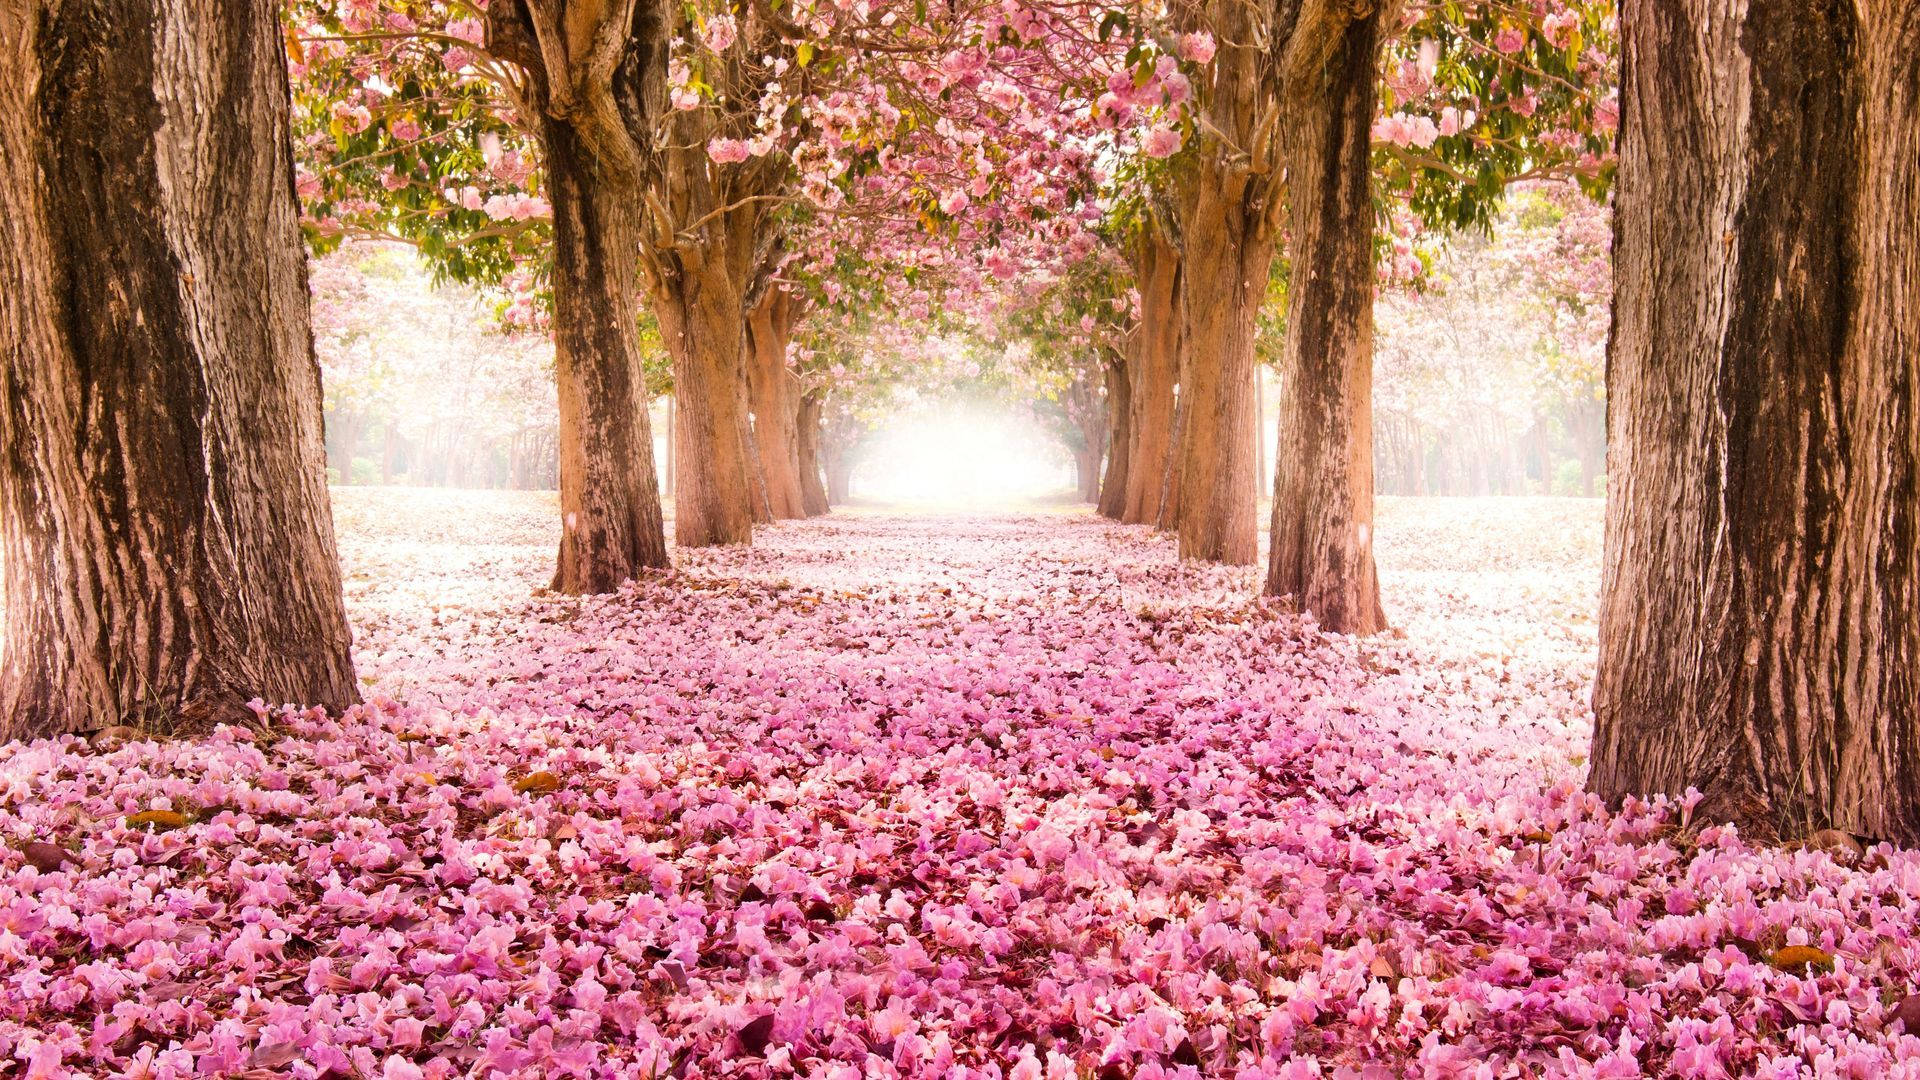 Tunnel Of Pink Cherry Blossom Flowers Wallpaper